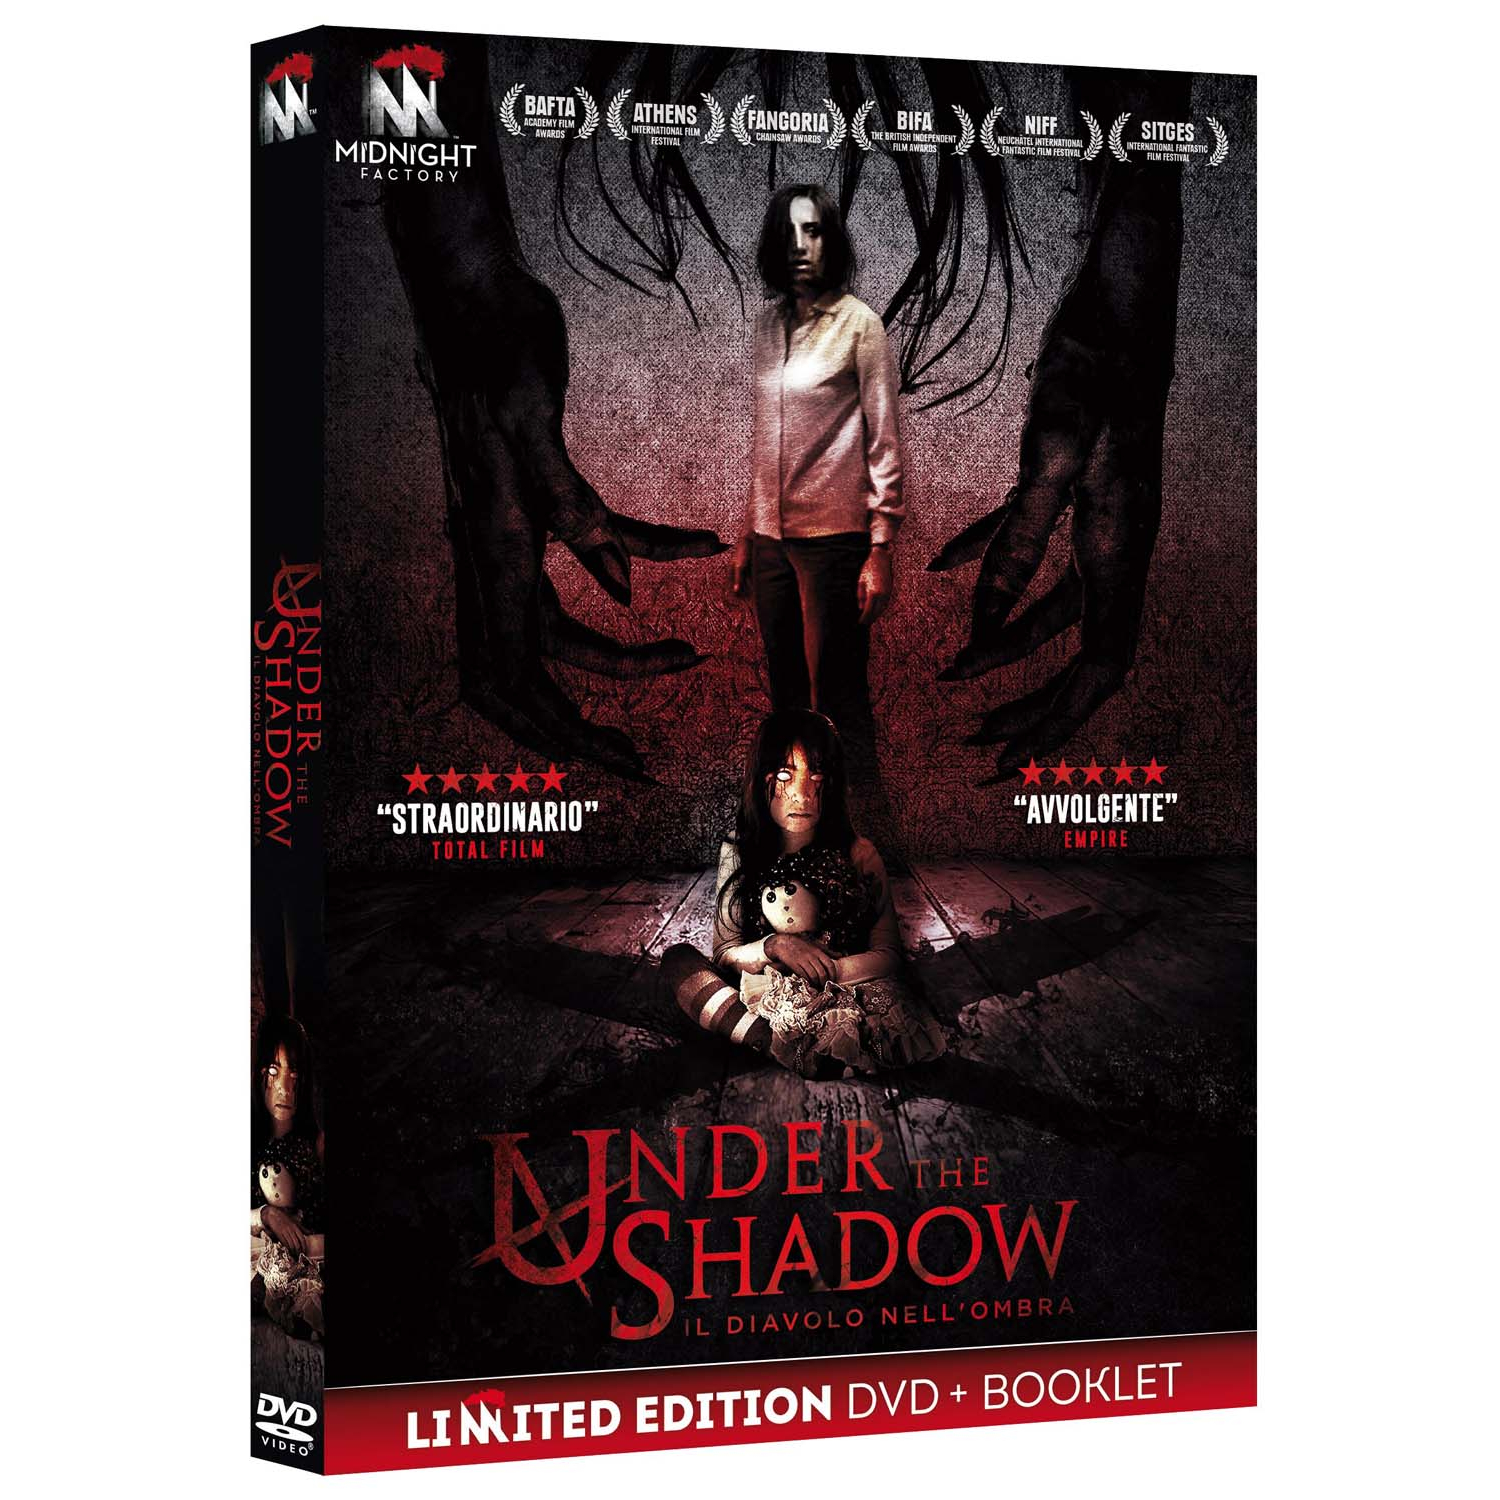 UNDER THE SHADOW - IL DIAVOLO NELL'OMBRA (LTD) (DVD+BOOKLET)